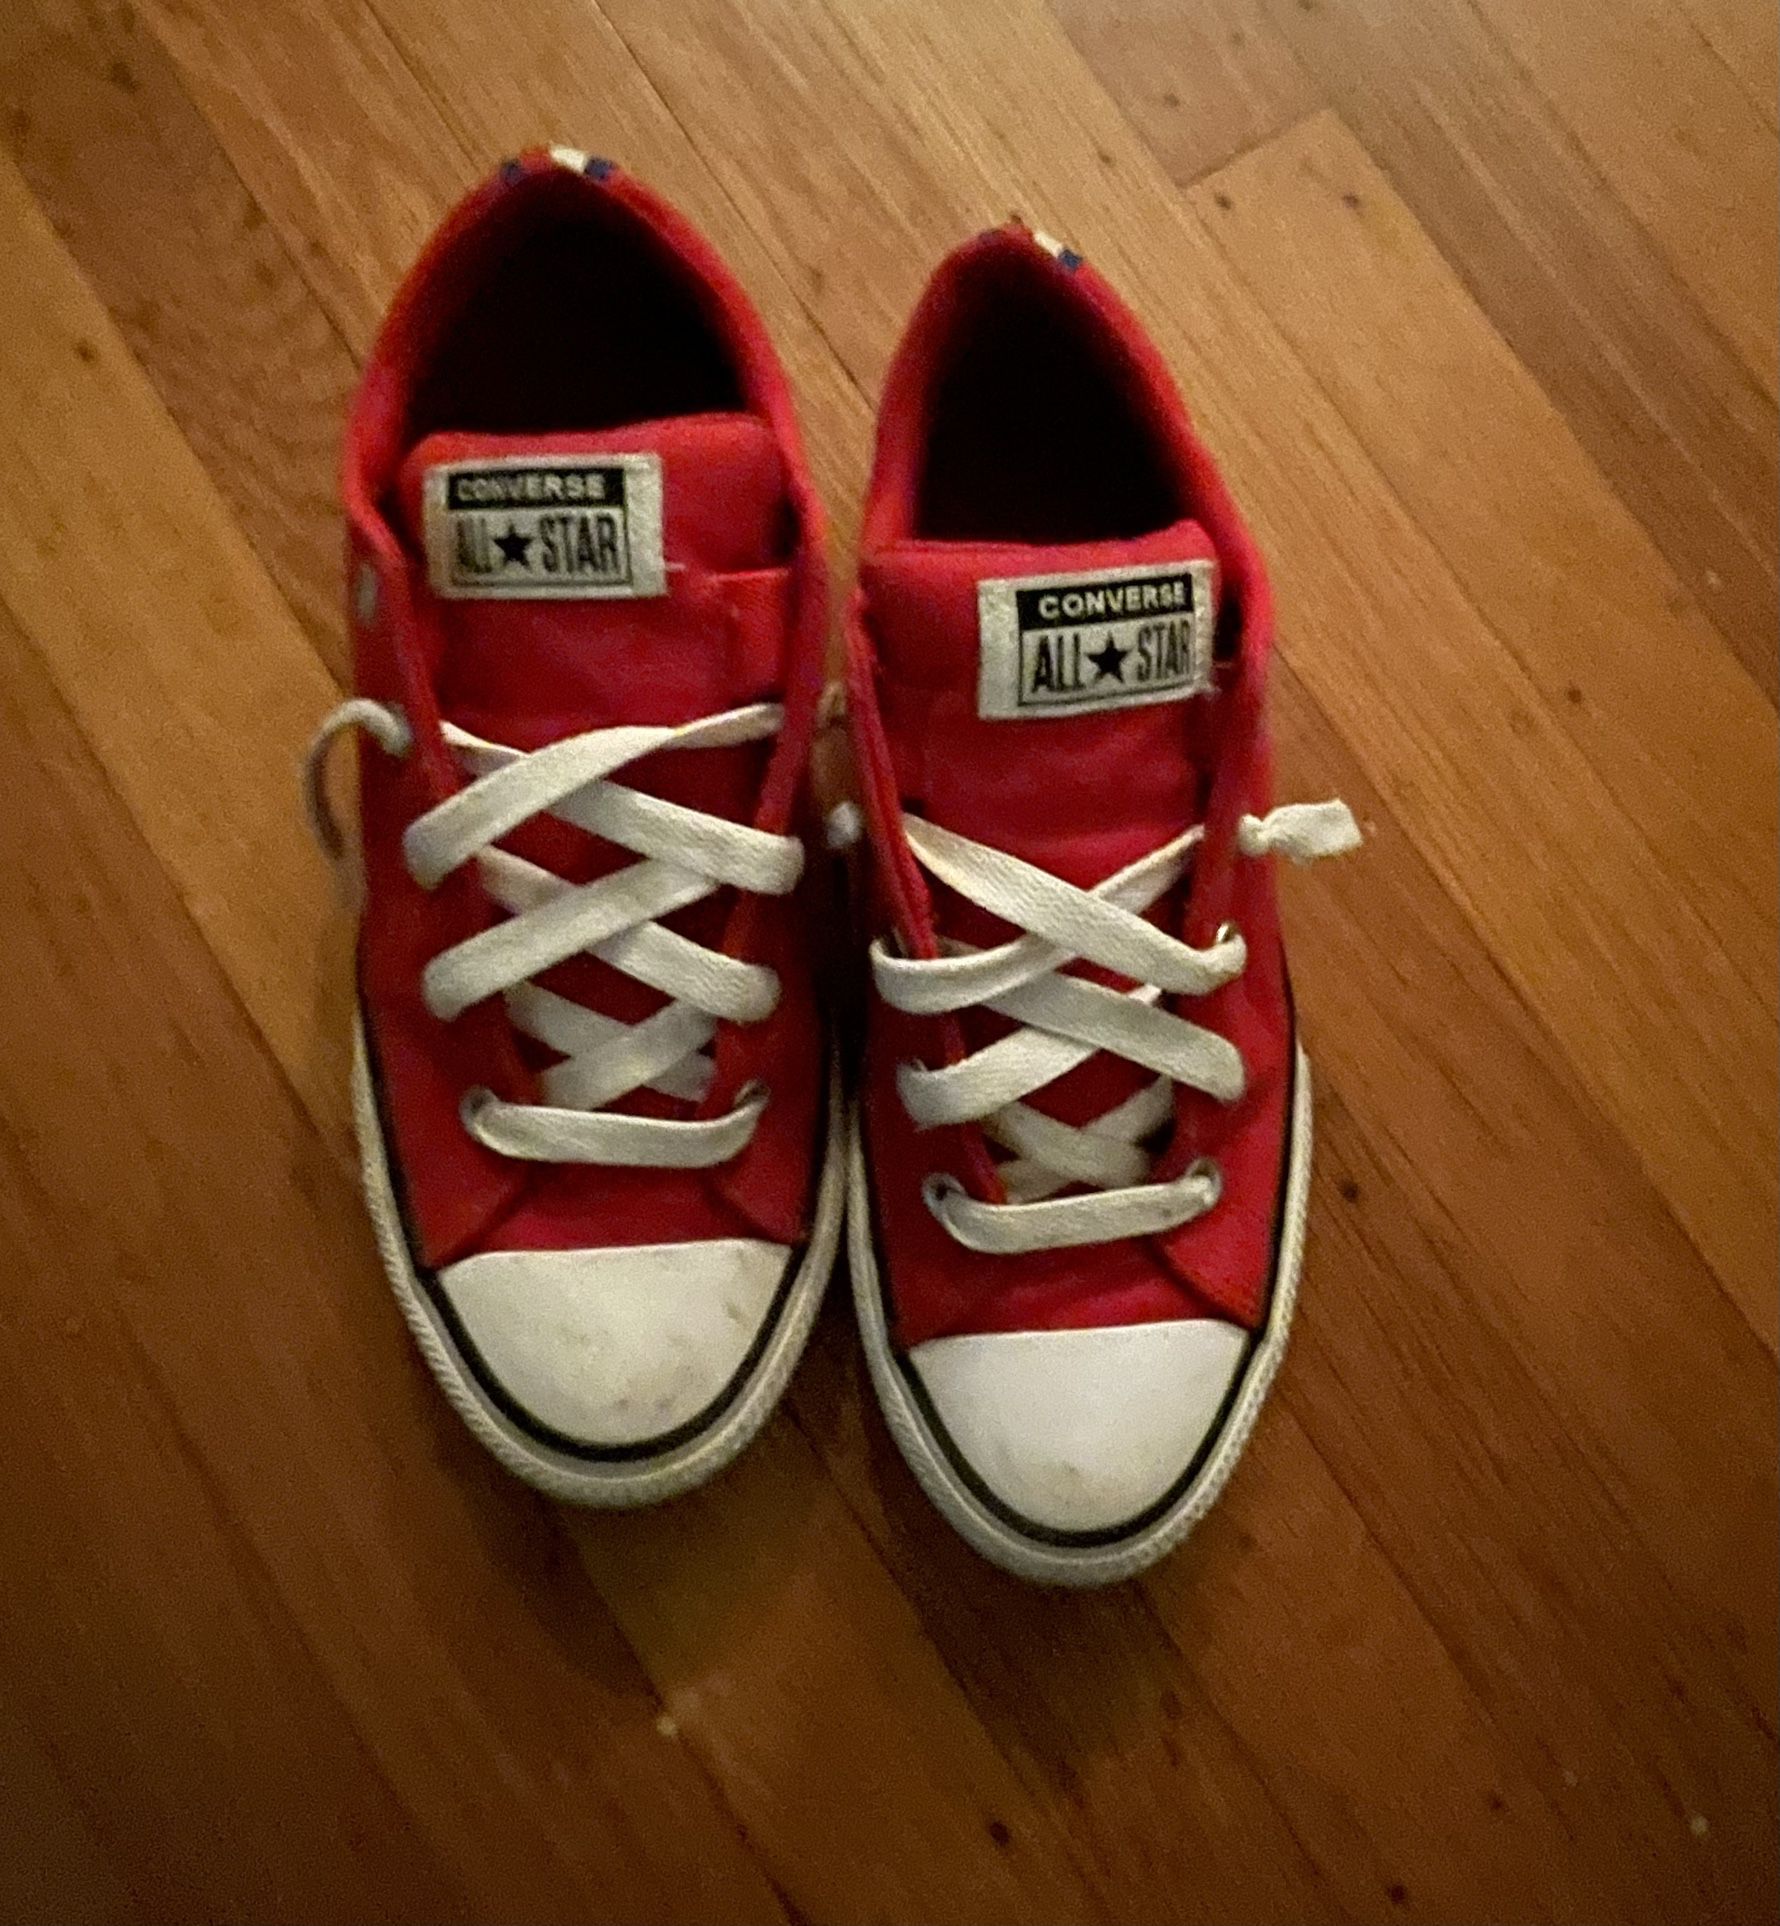 Red ~ Converse ~ Size 4 Big Kids OR Size 6.5/ 7 women’s